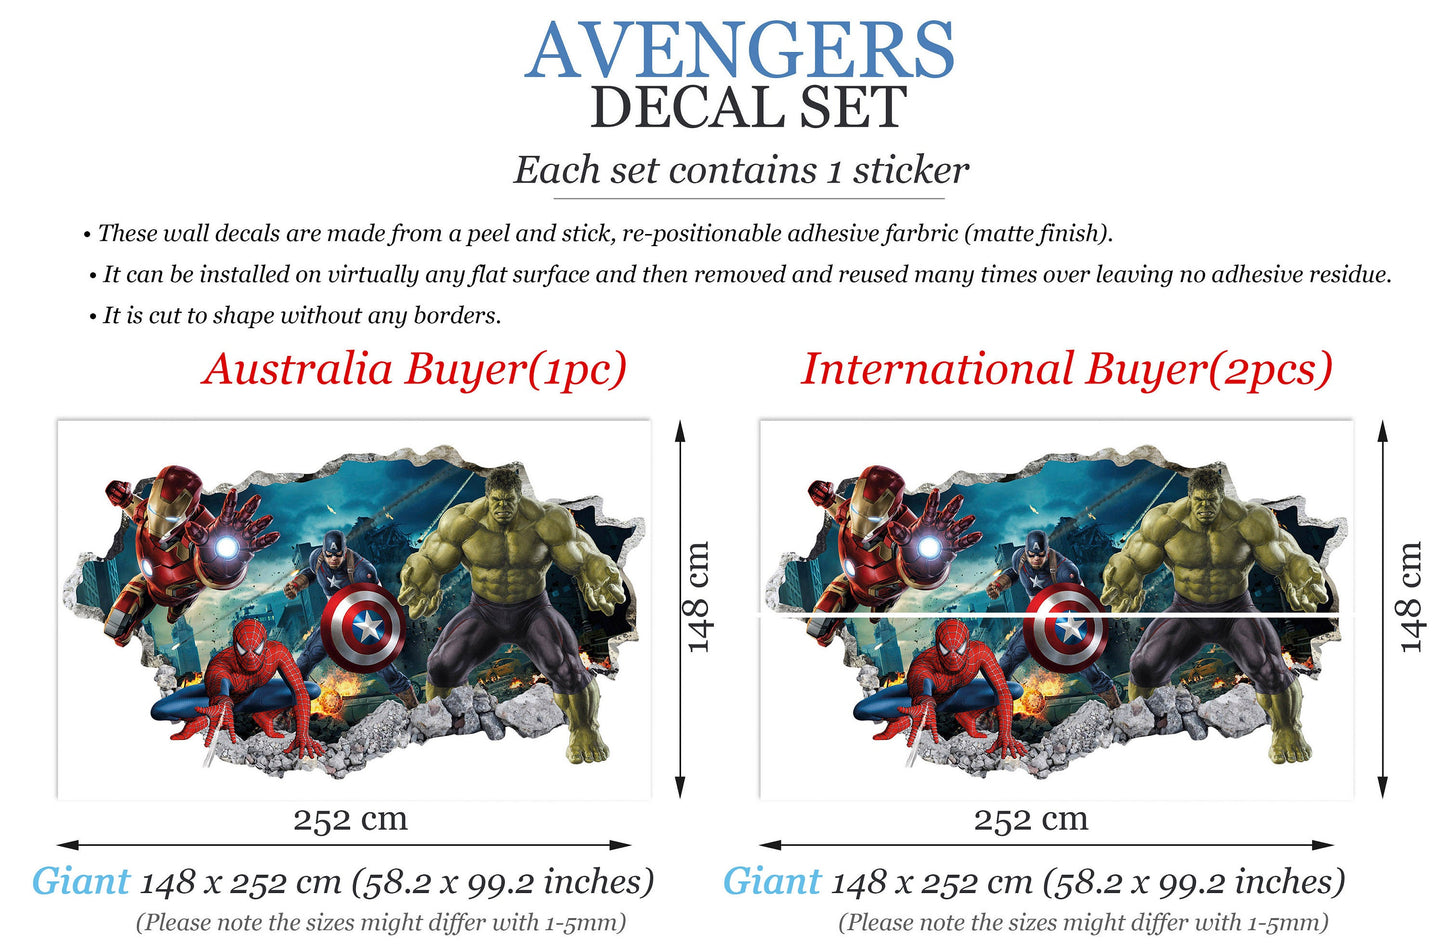 Avengers Hulk Spiderman Iron Man Captain America Superheroes coming out 3D Smashed Wall Decal - BR157